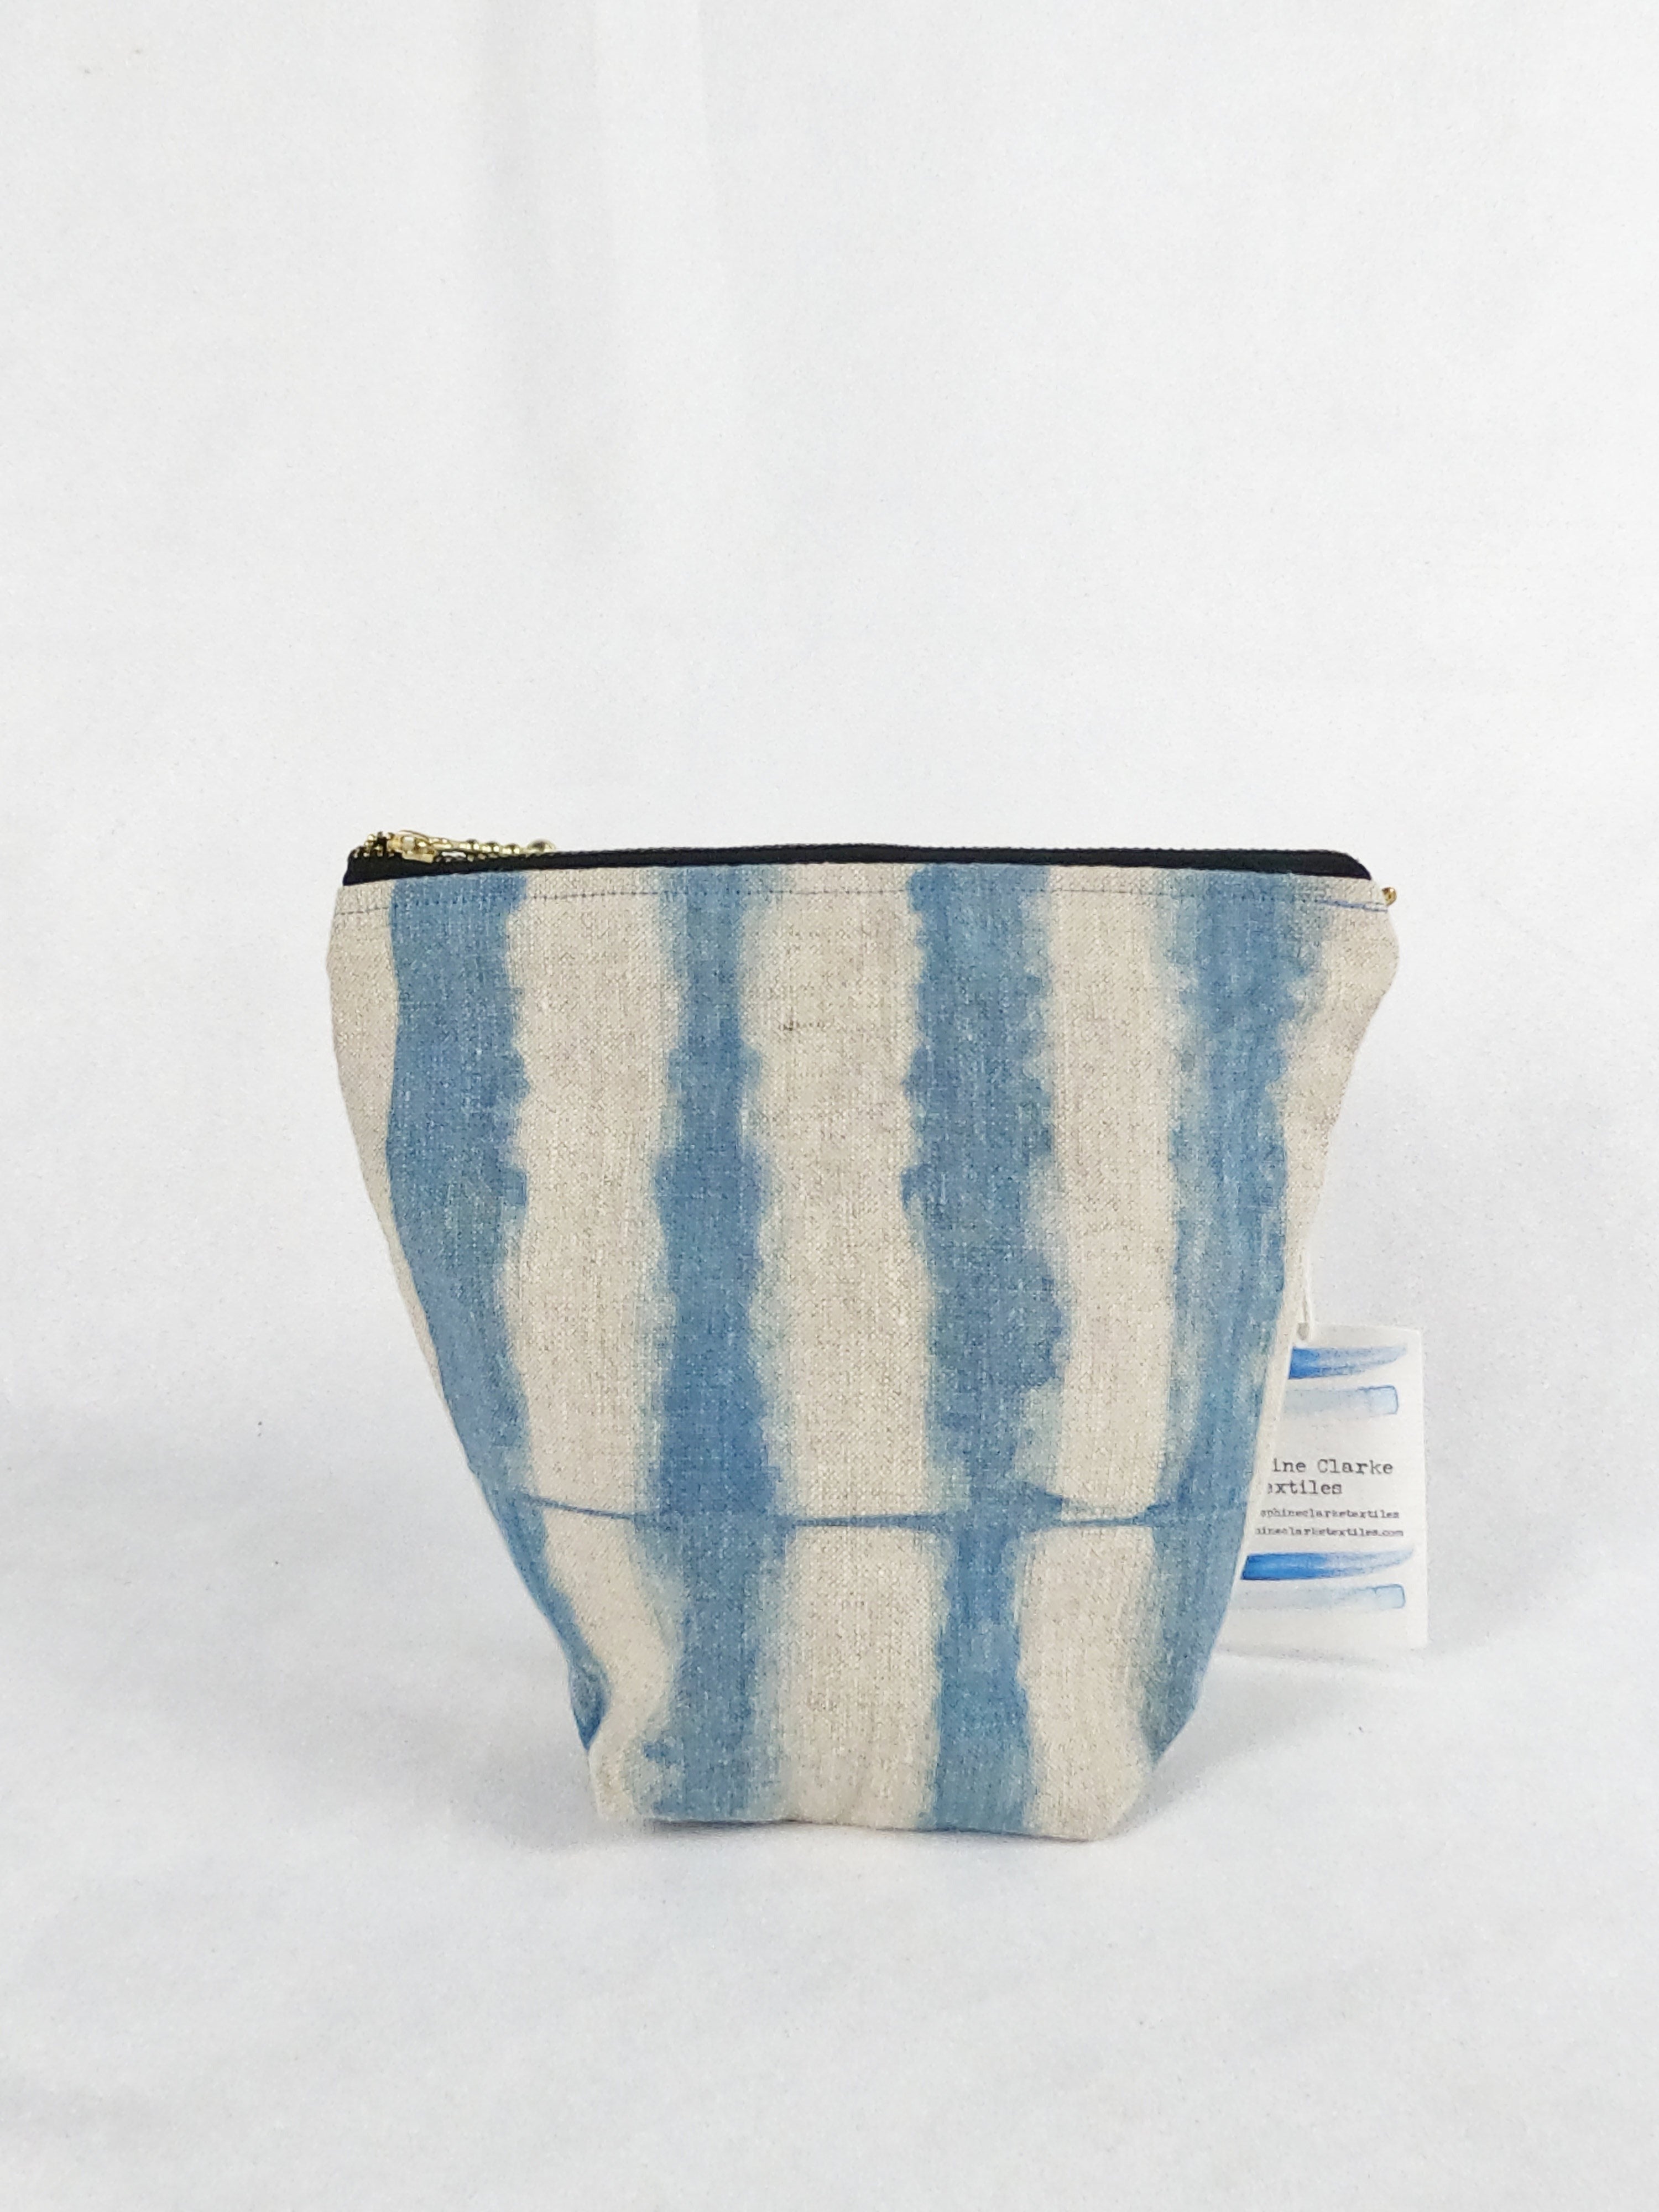 A blue and tan zipper pouch bag with a striped pattern. It is wide at the top and narrow at the bottom.